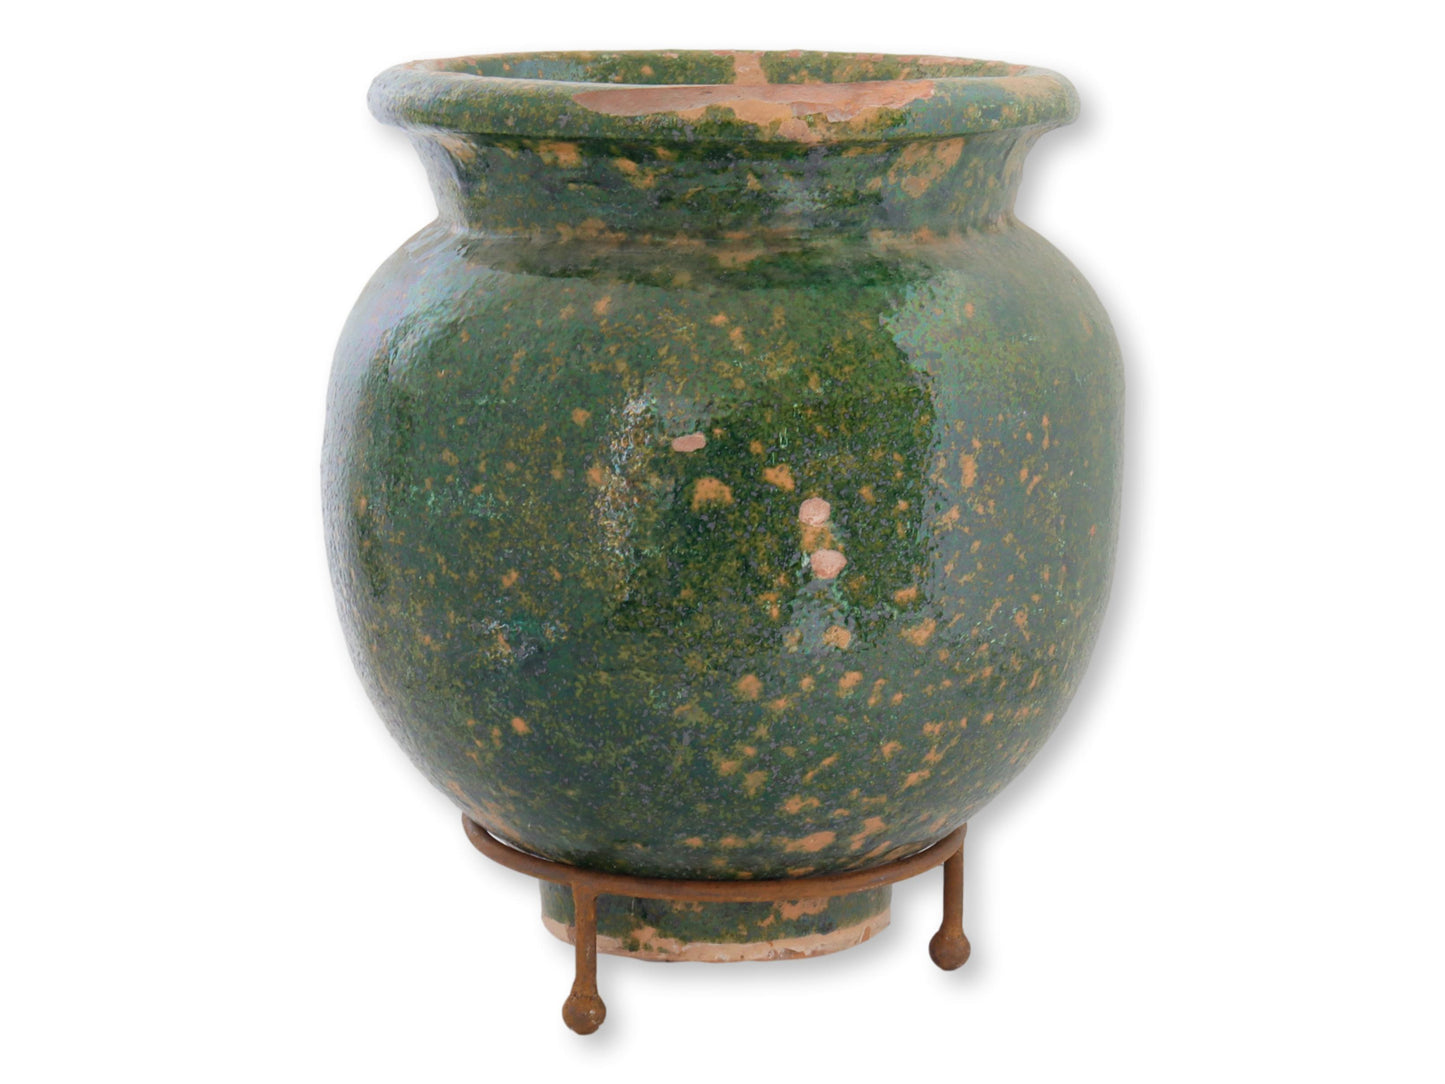 Copy of French Green Glazed Confit Pot w/Stand